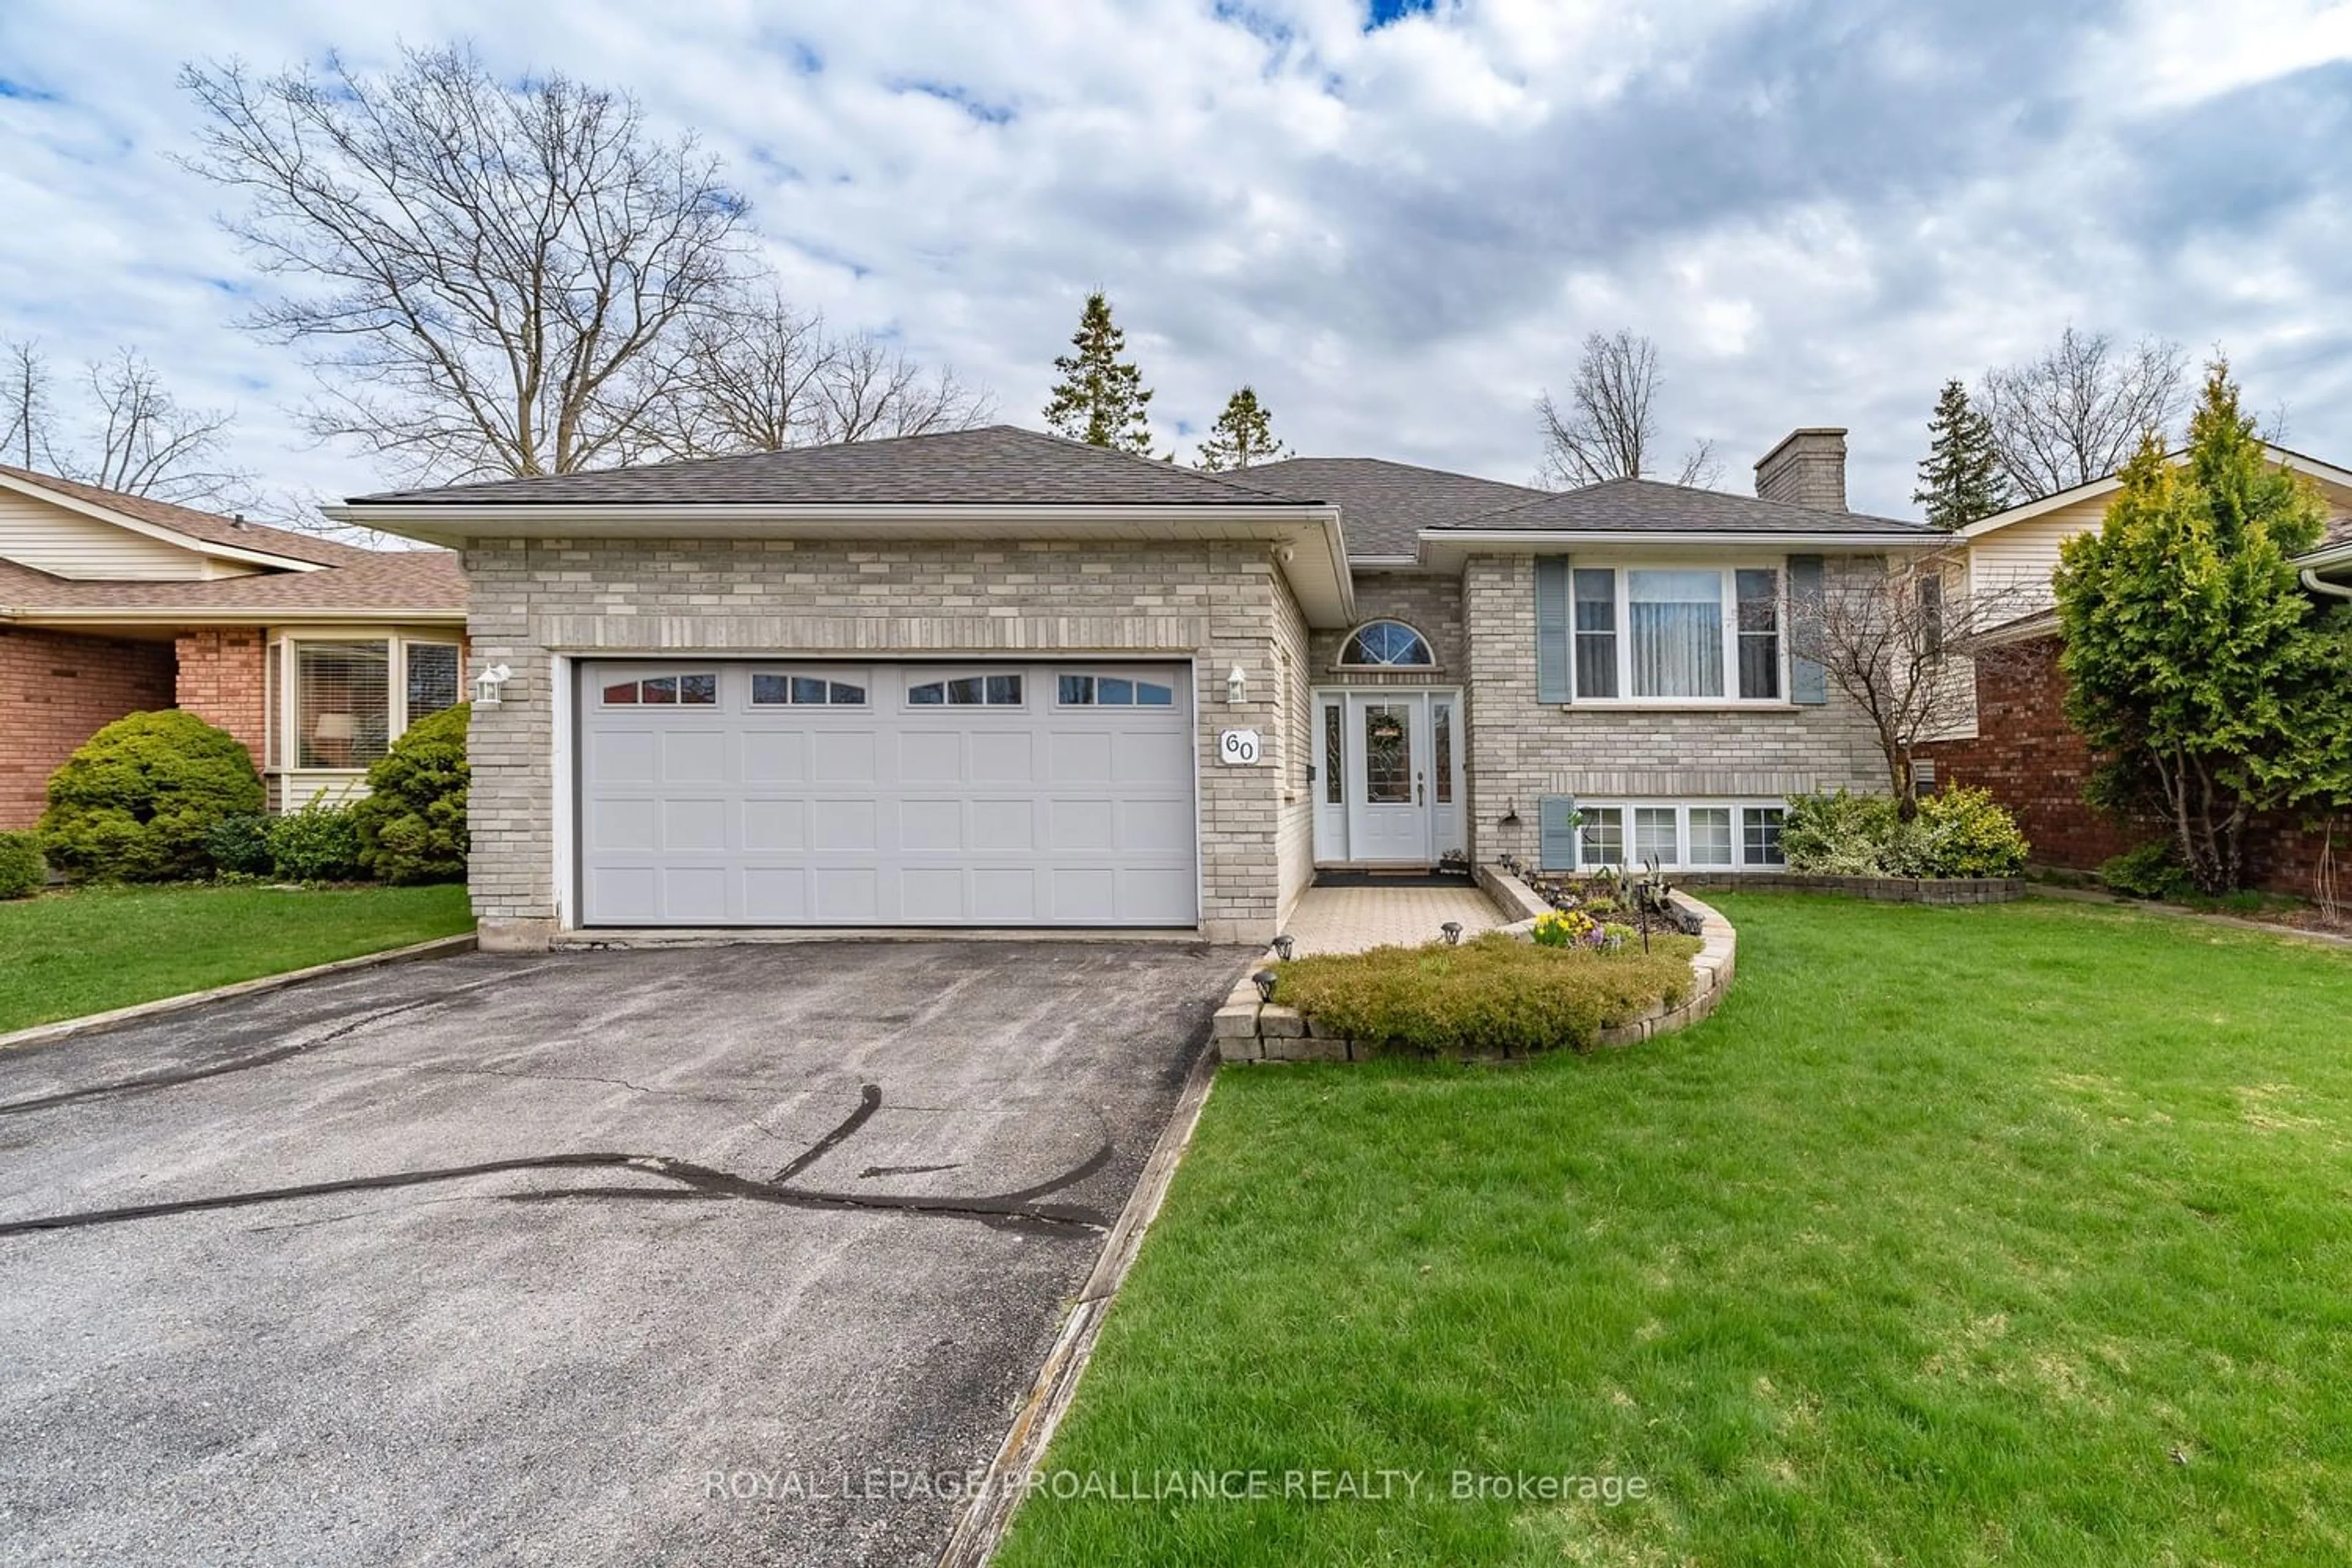 Frontside or backside of a home for 60 Forchuk Cres, Quinte West Ontario K8V 6N2